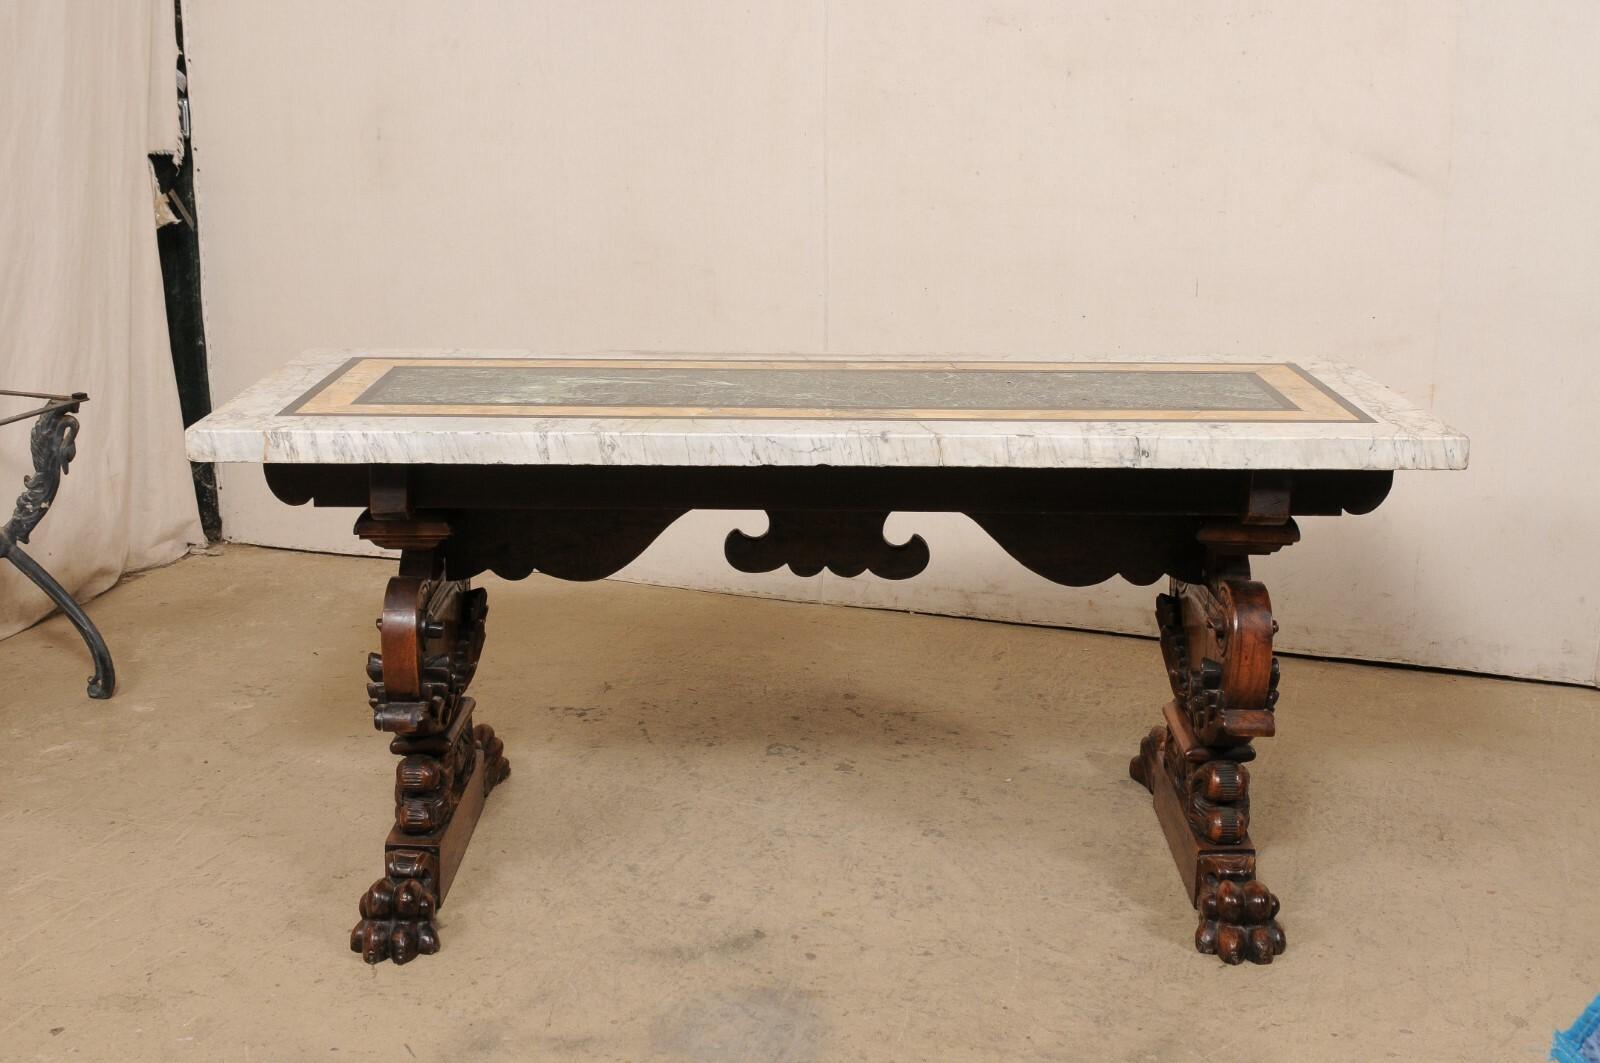 A Gorgeous 18th C Italian Inlaid Marble Top Table w/Robustly Carved Trestle Legs For Sale 1